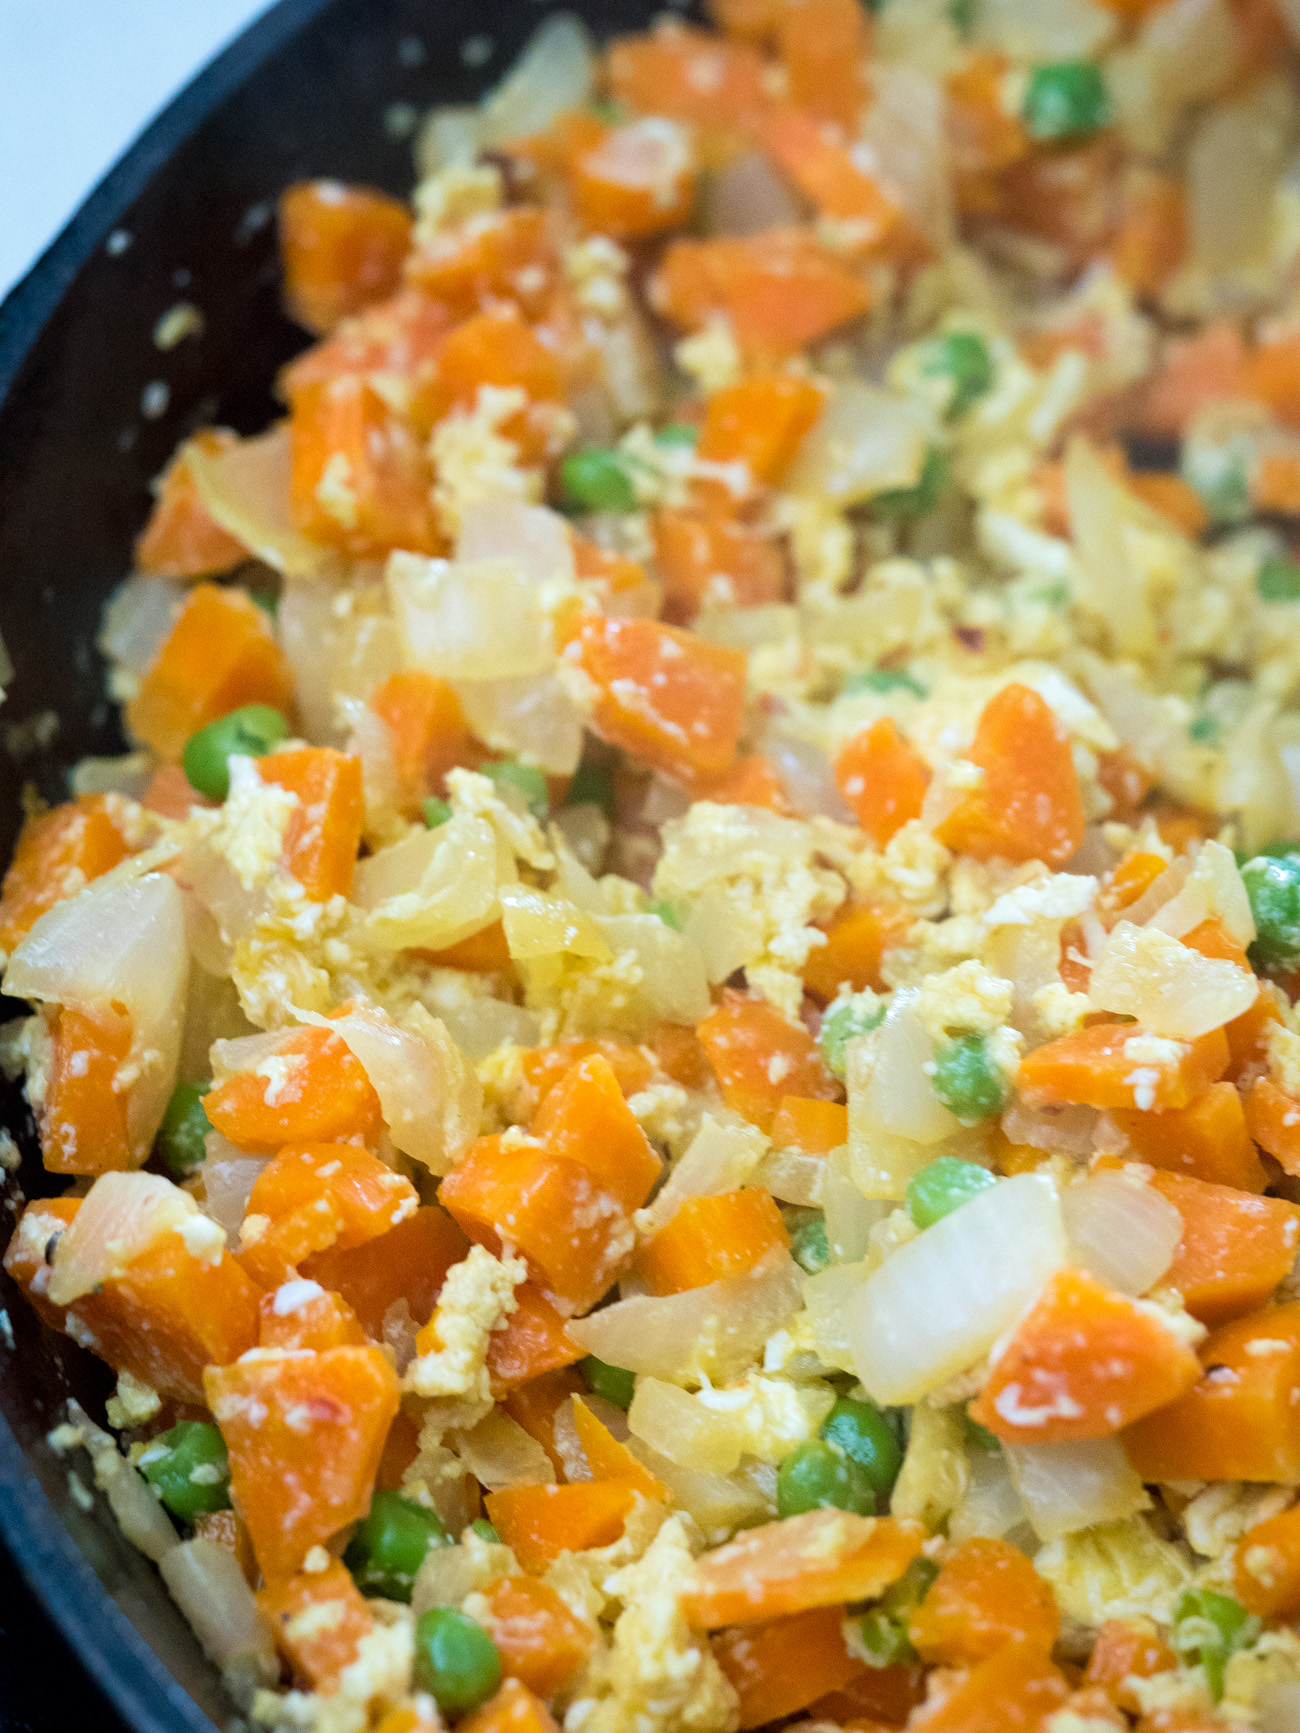 Crack eggs into pan and scramble, mixing with vegetables.